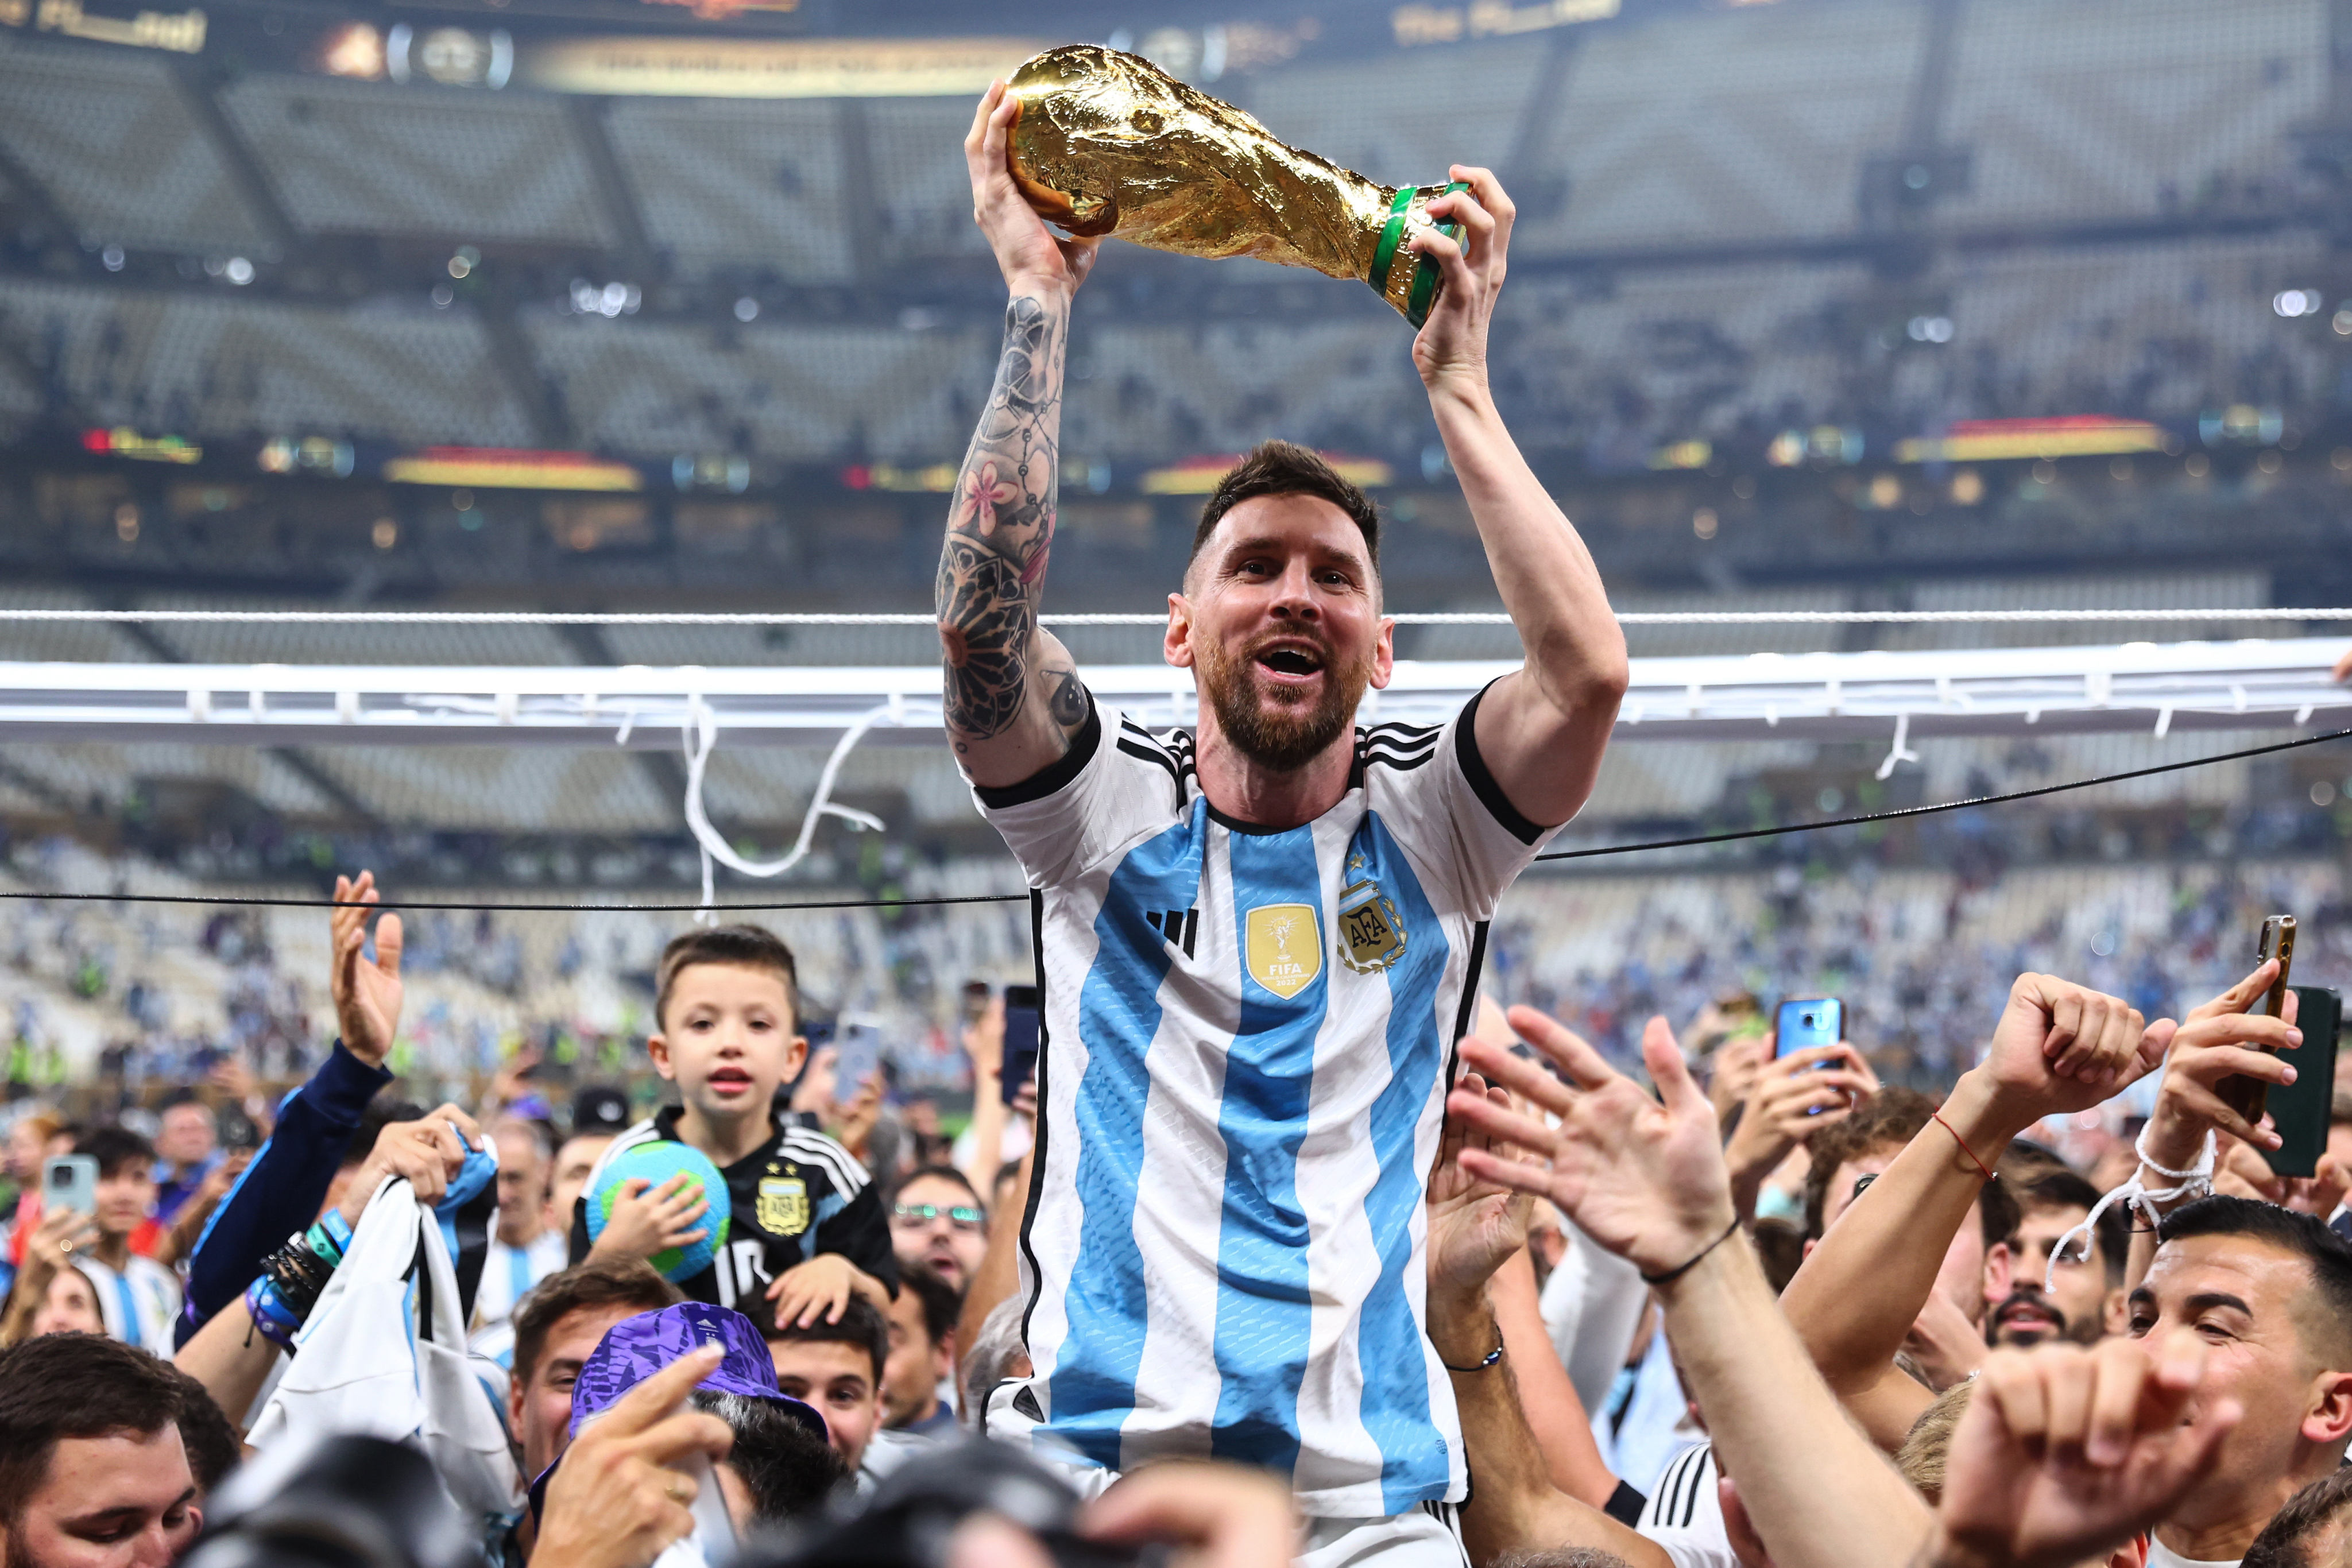 Argentina’s Lionel Messi celebrates with the World Cup trophy after his side’s victory over France in the final in Qatar. Photo: DPA